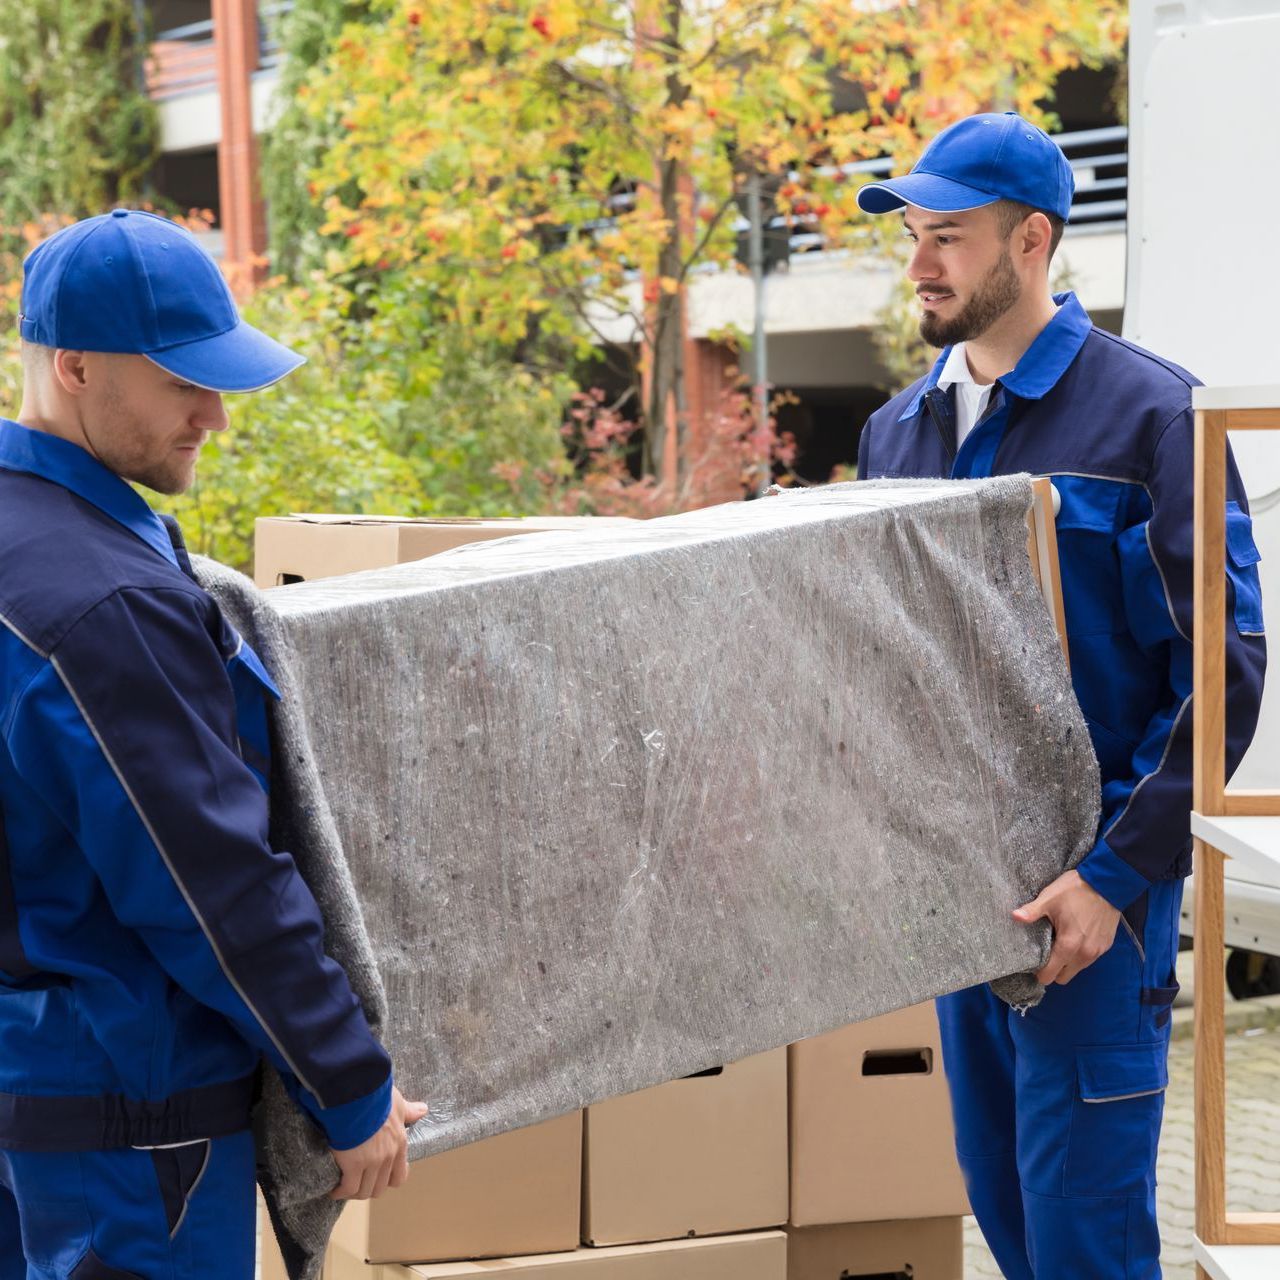 two men in blue uniforms are carrying a large piece of furniture .